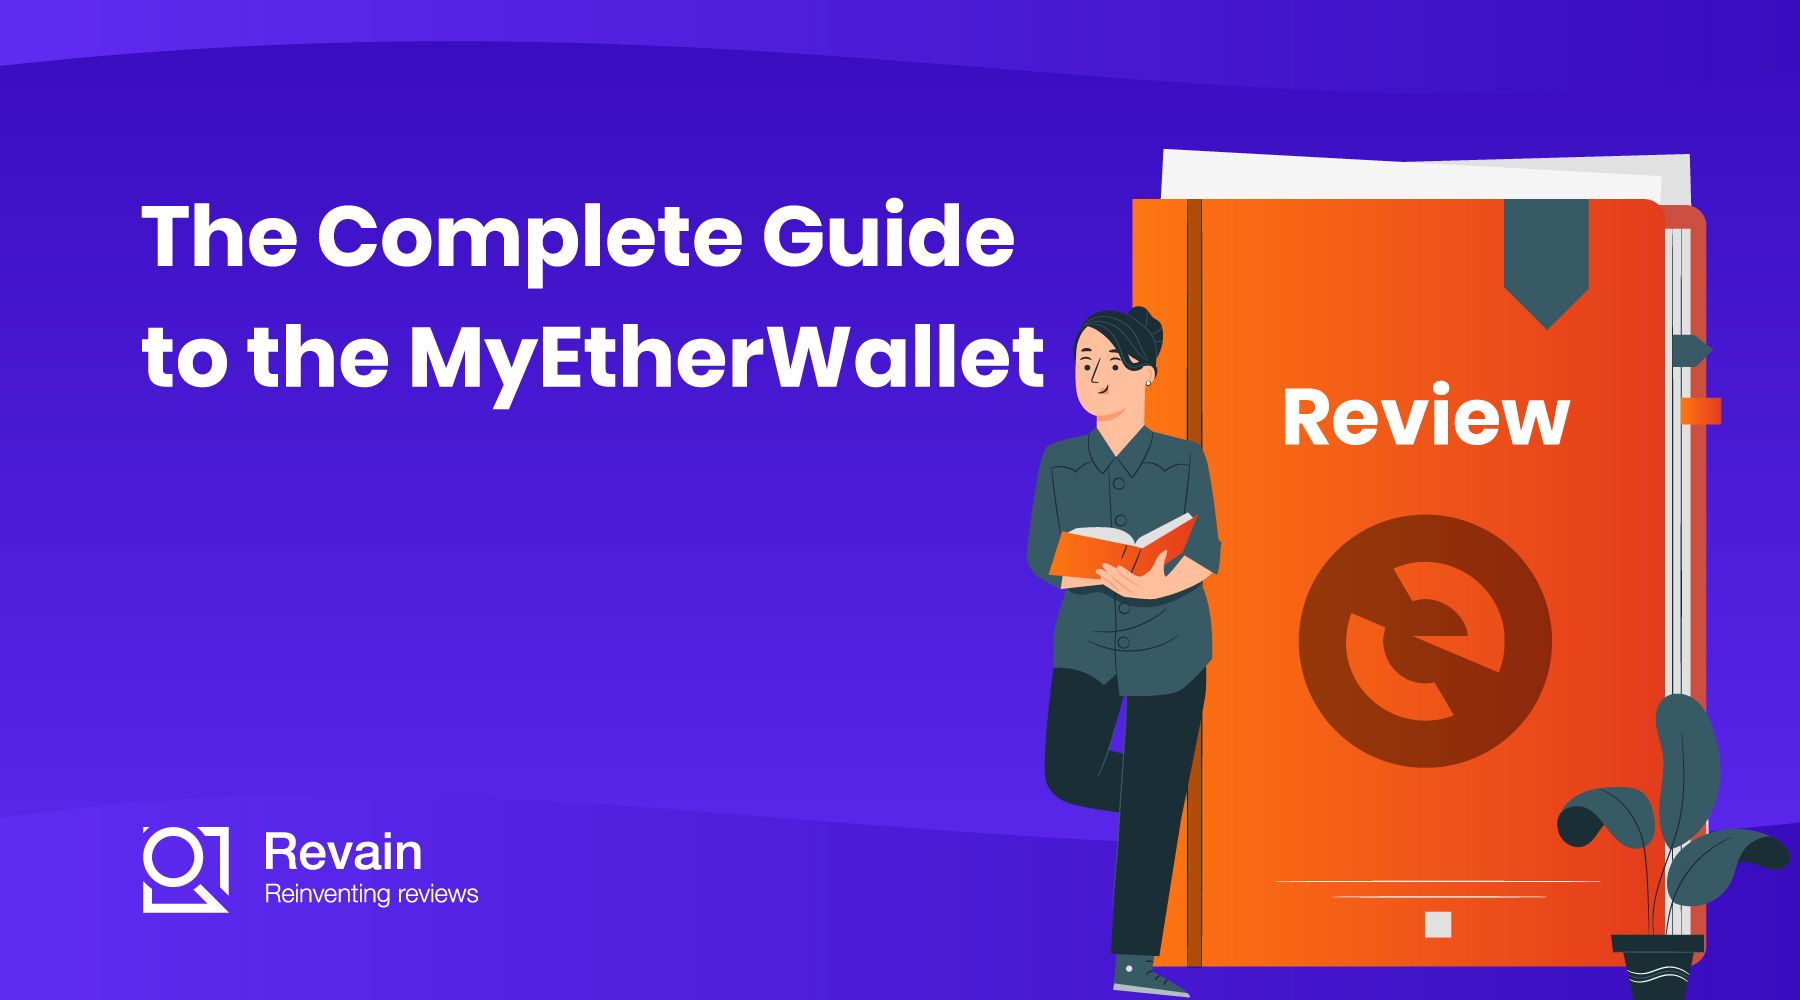 The Complete Guide to the MyEtherWallet